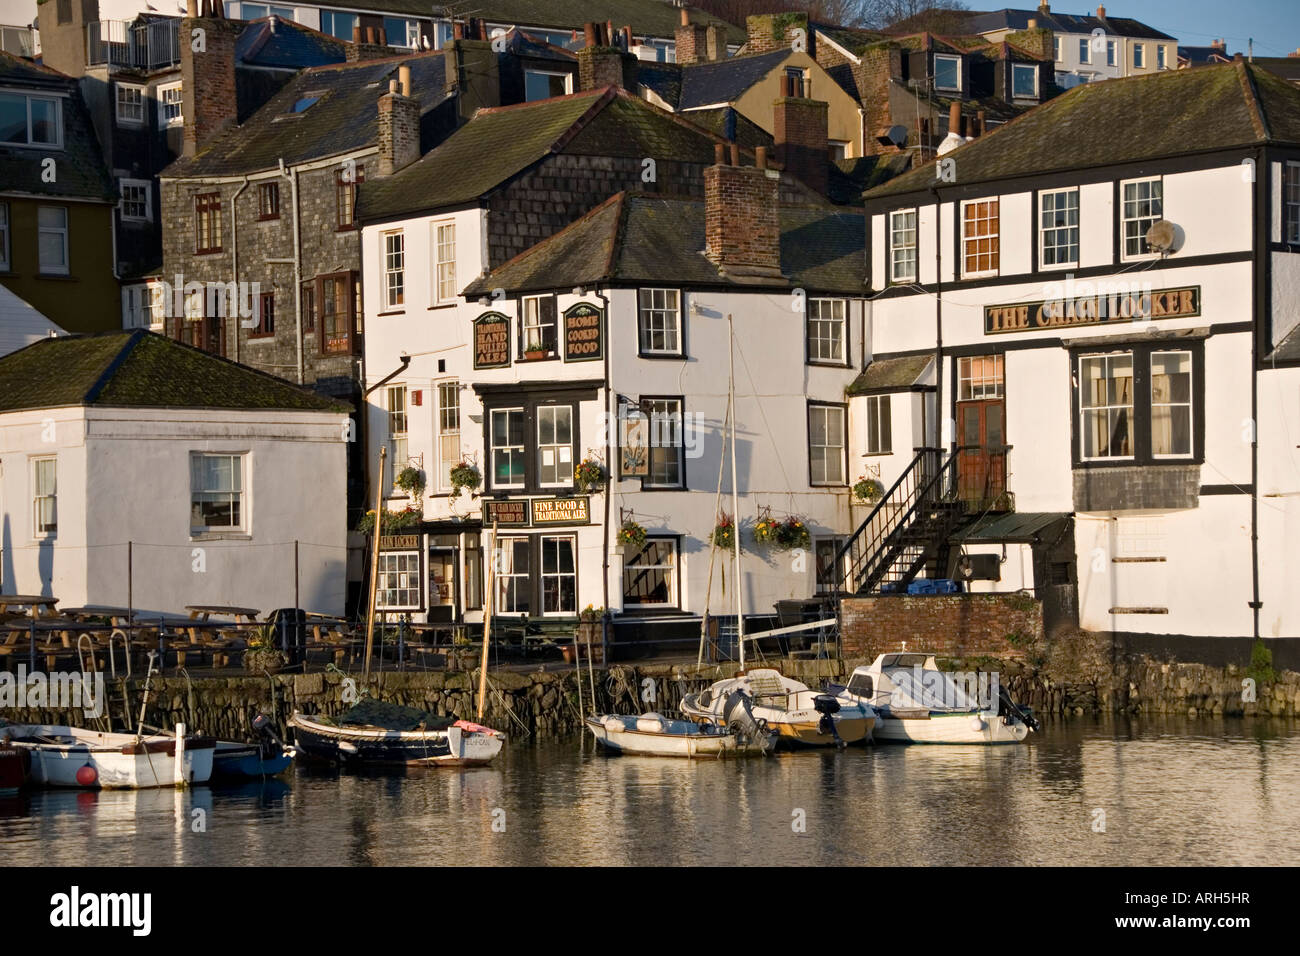 Falmouth, Cornwall, UK. View from Custom House Quay showing The Chain Locker public house, early morning Stock Photo